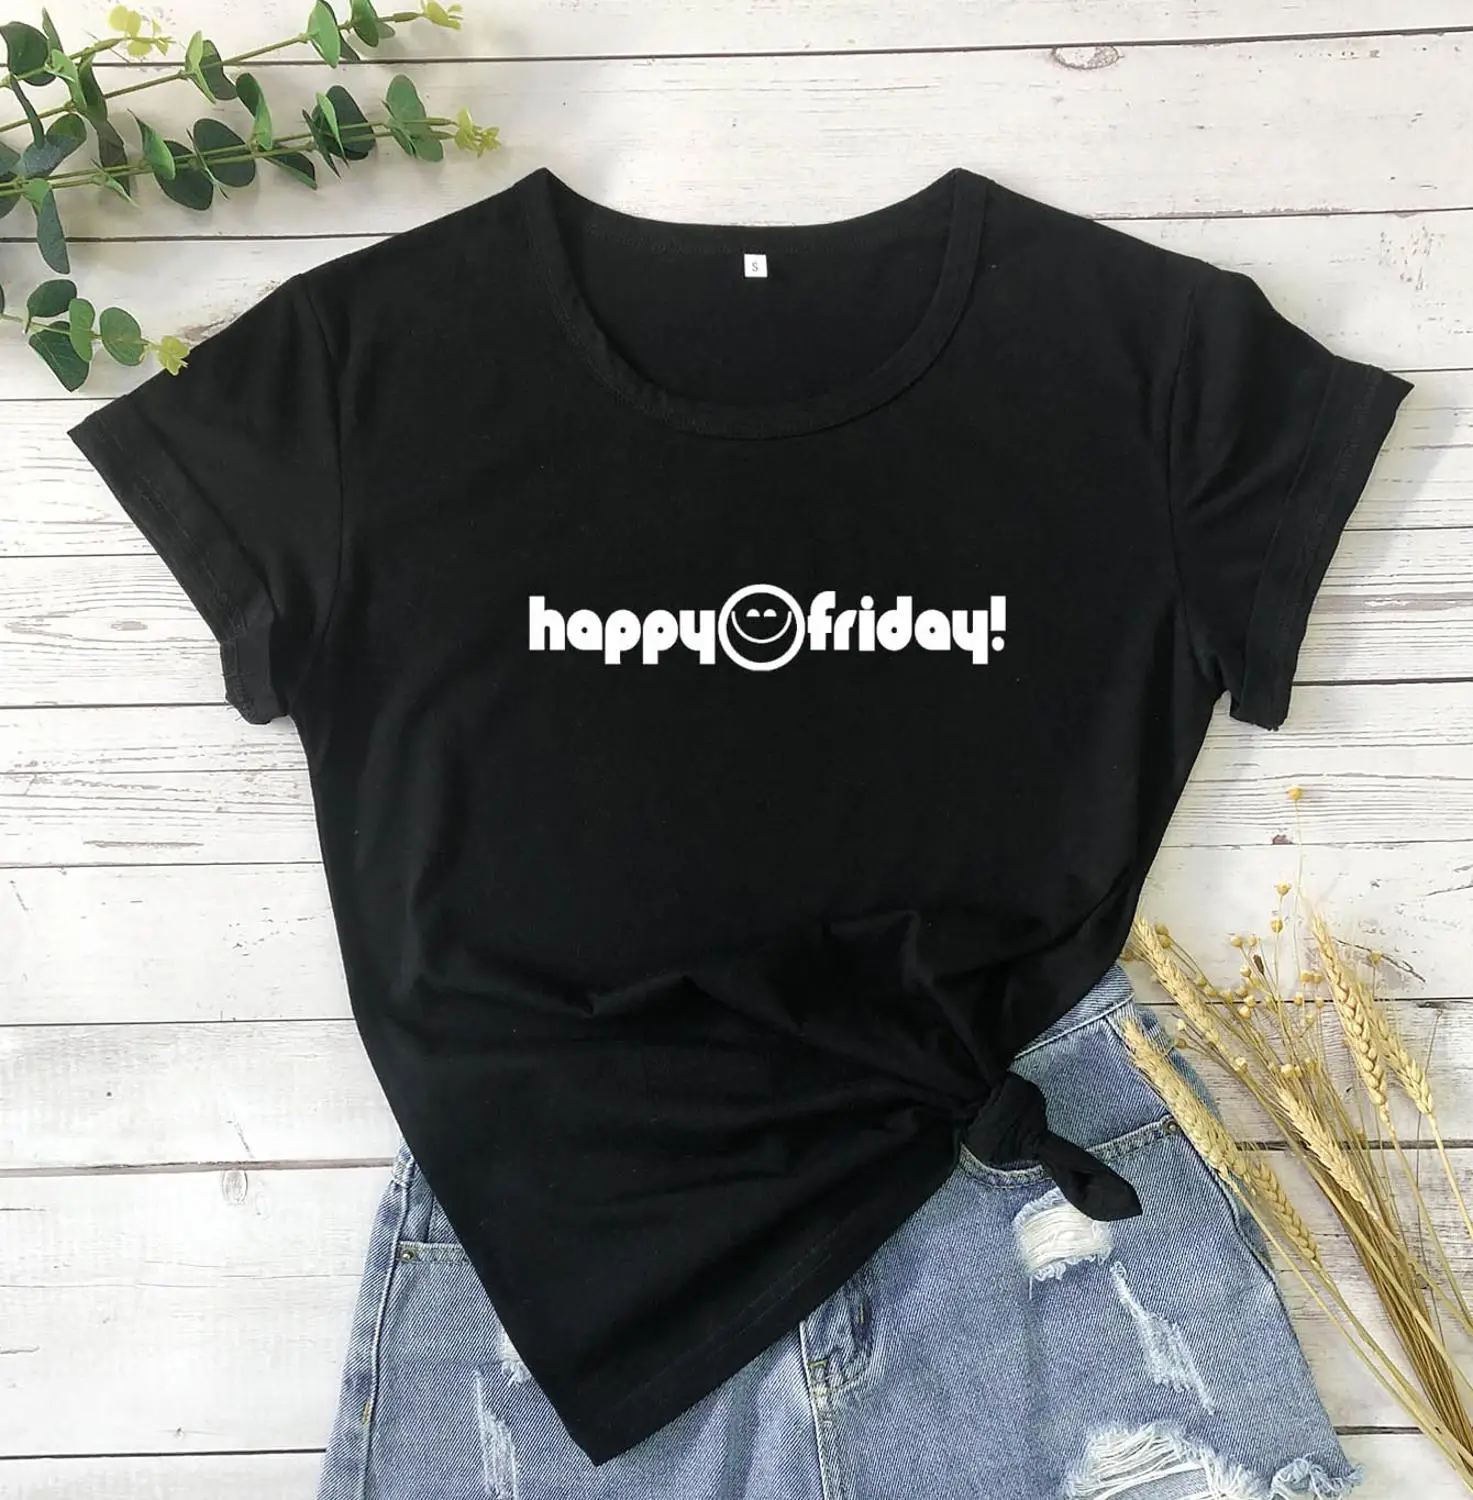 

Happy Friday T Shirt cute graphic women fashion hipster grunge tumblr young hipster quote party street style cotton tee gift top